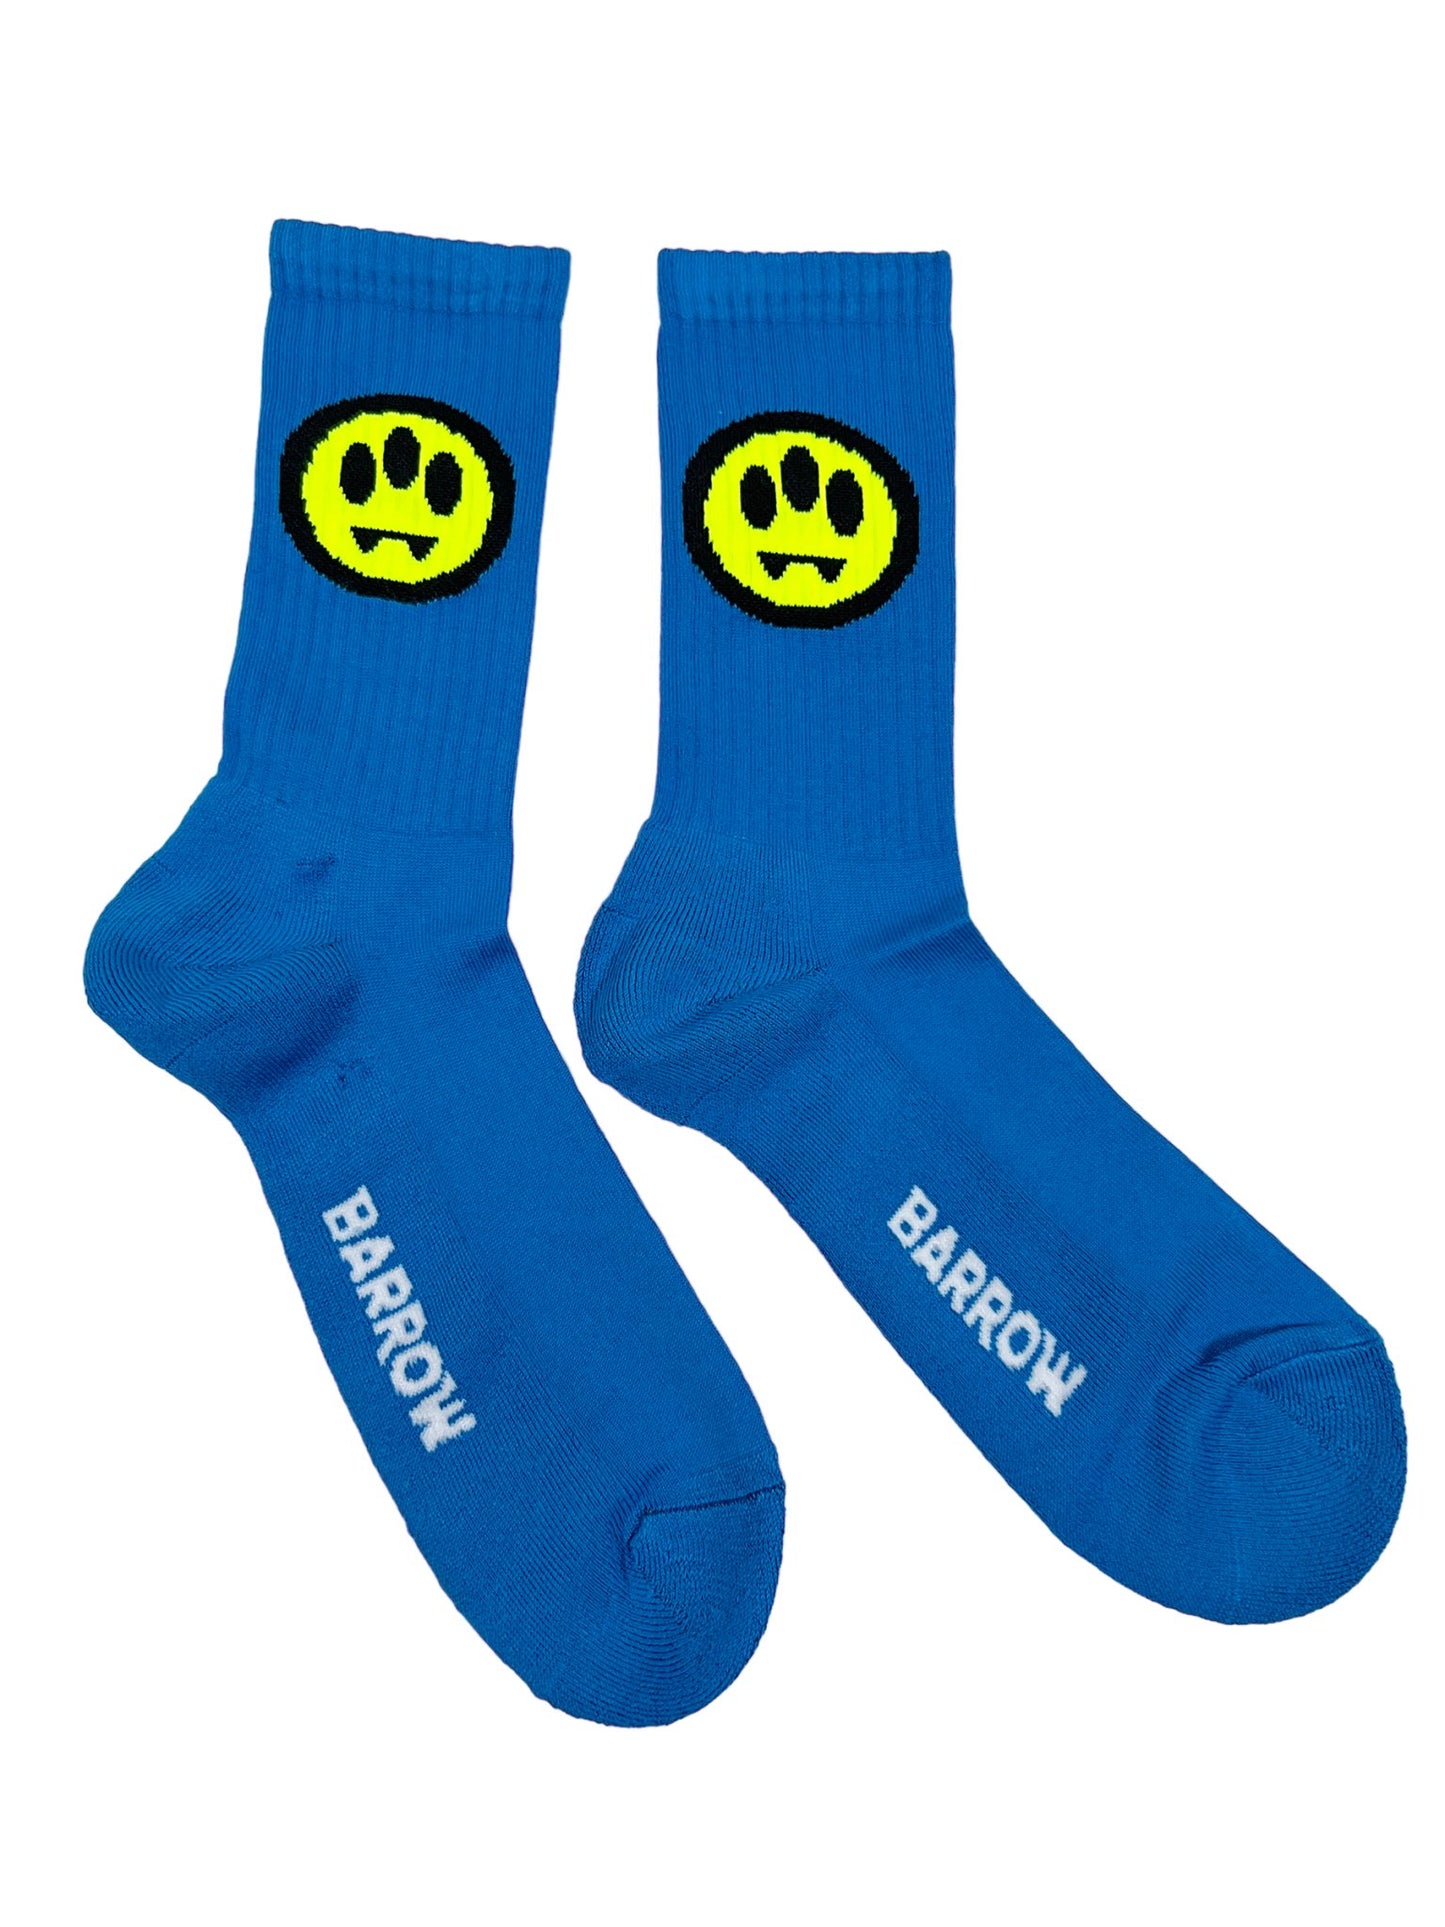 A pair of green BARROW S4BWUASO140 SOCKS UNISEX with yellow smiley face logos and the text "BARROW" on the soles, displayed against a white background.